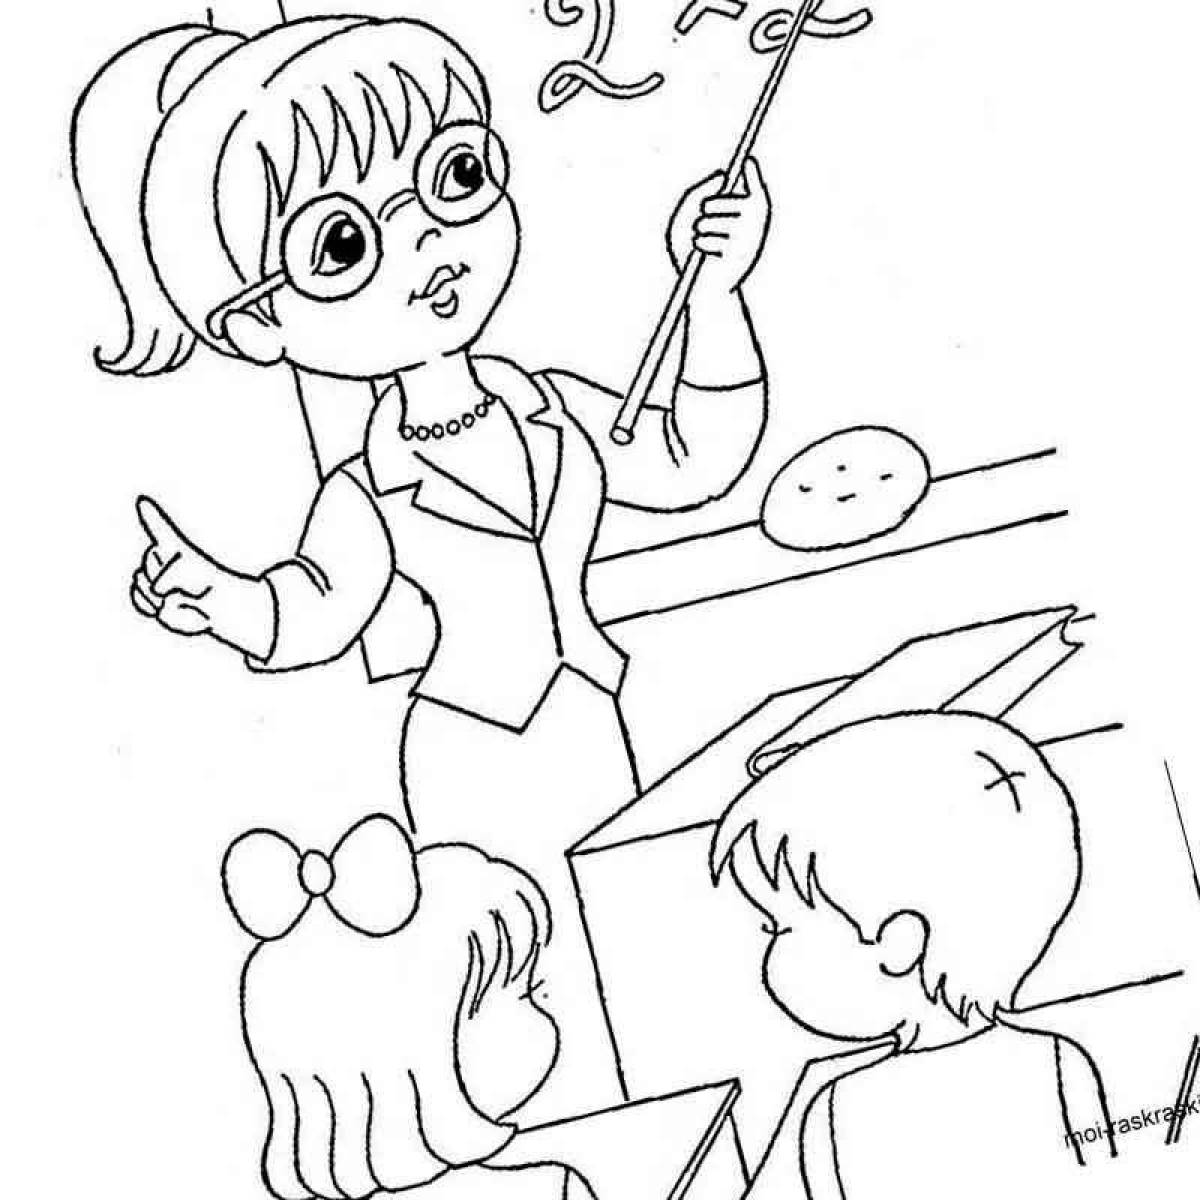 Animated coloring book for students